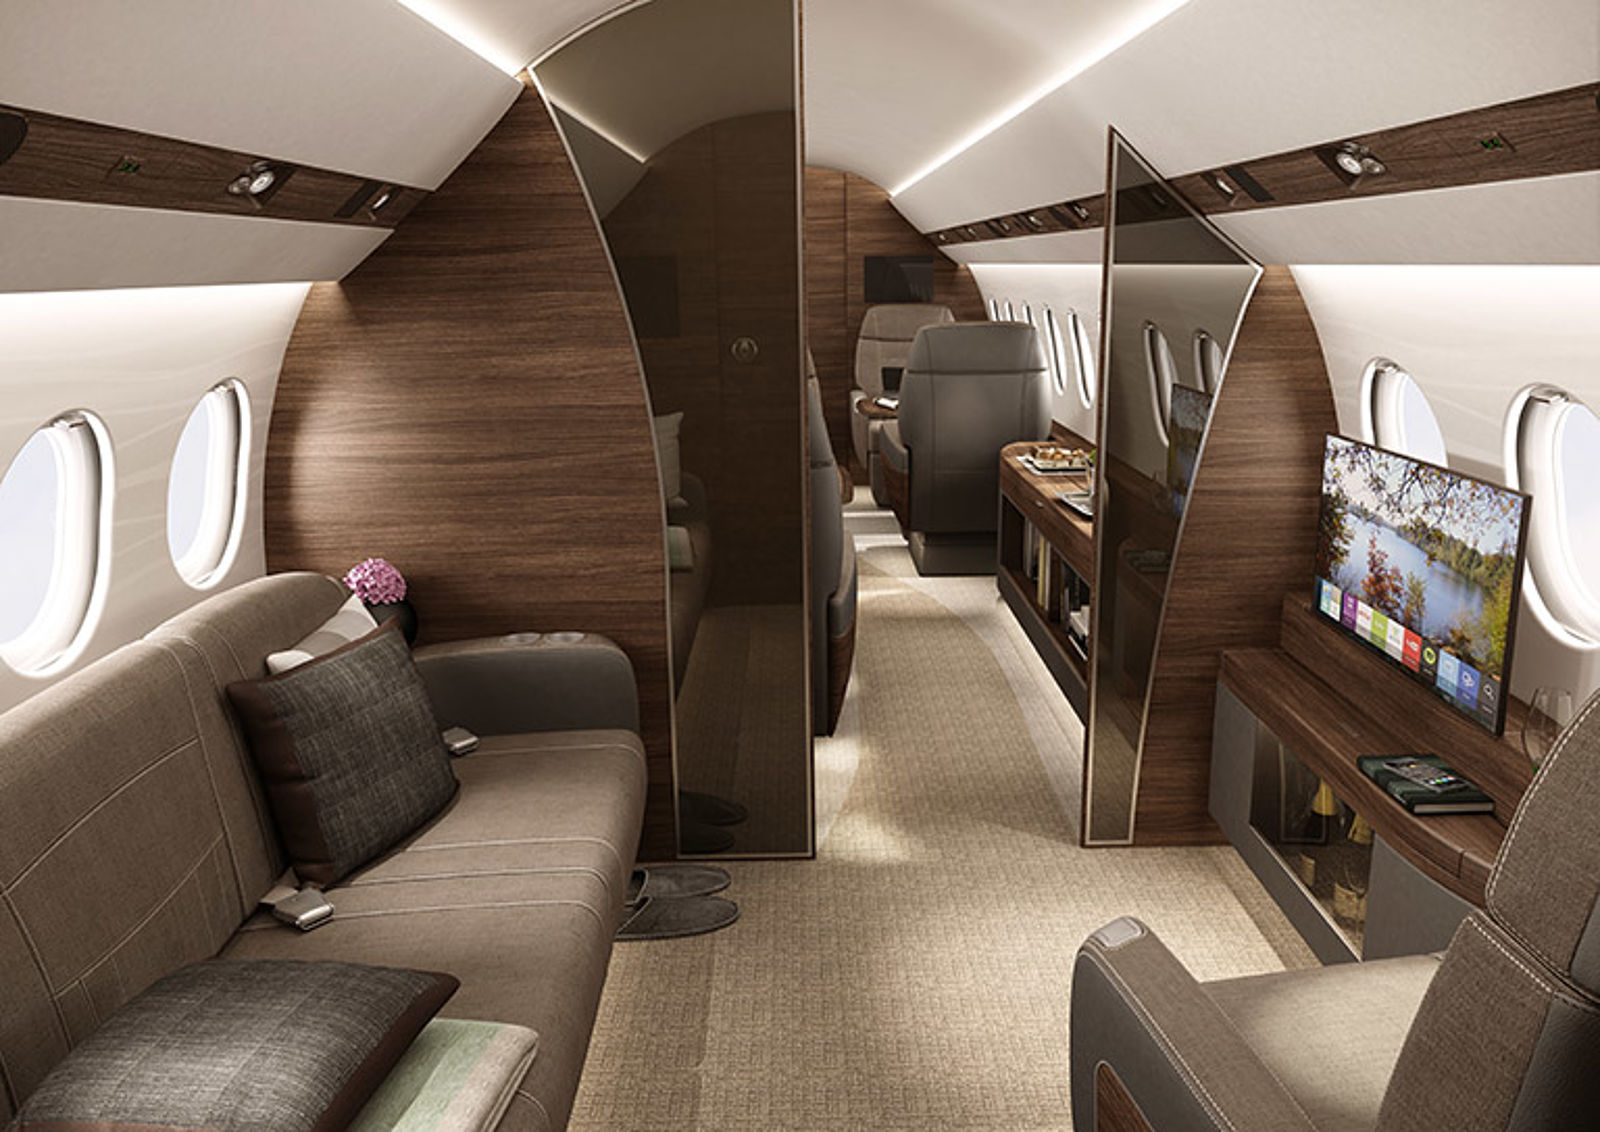 Crystal Cabin Award Airplane Interior Designs Show Future of Travel